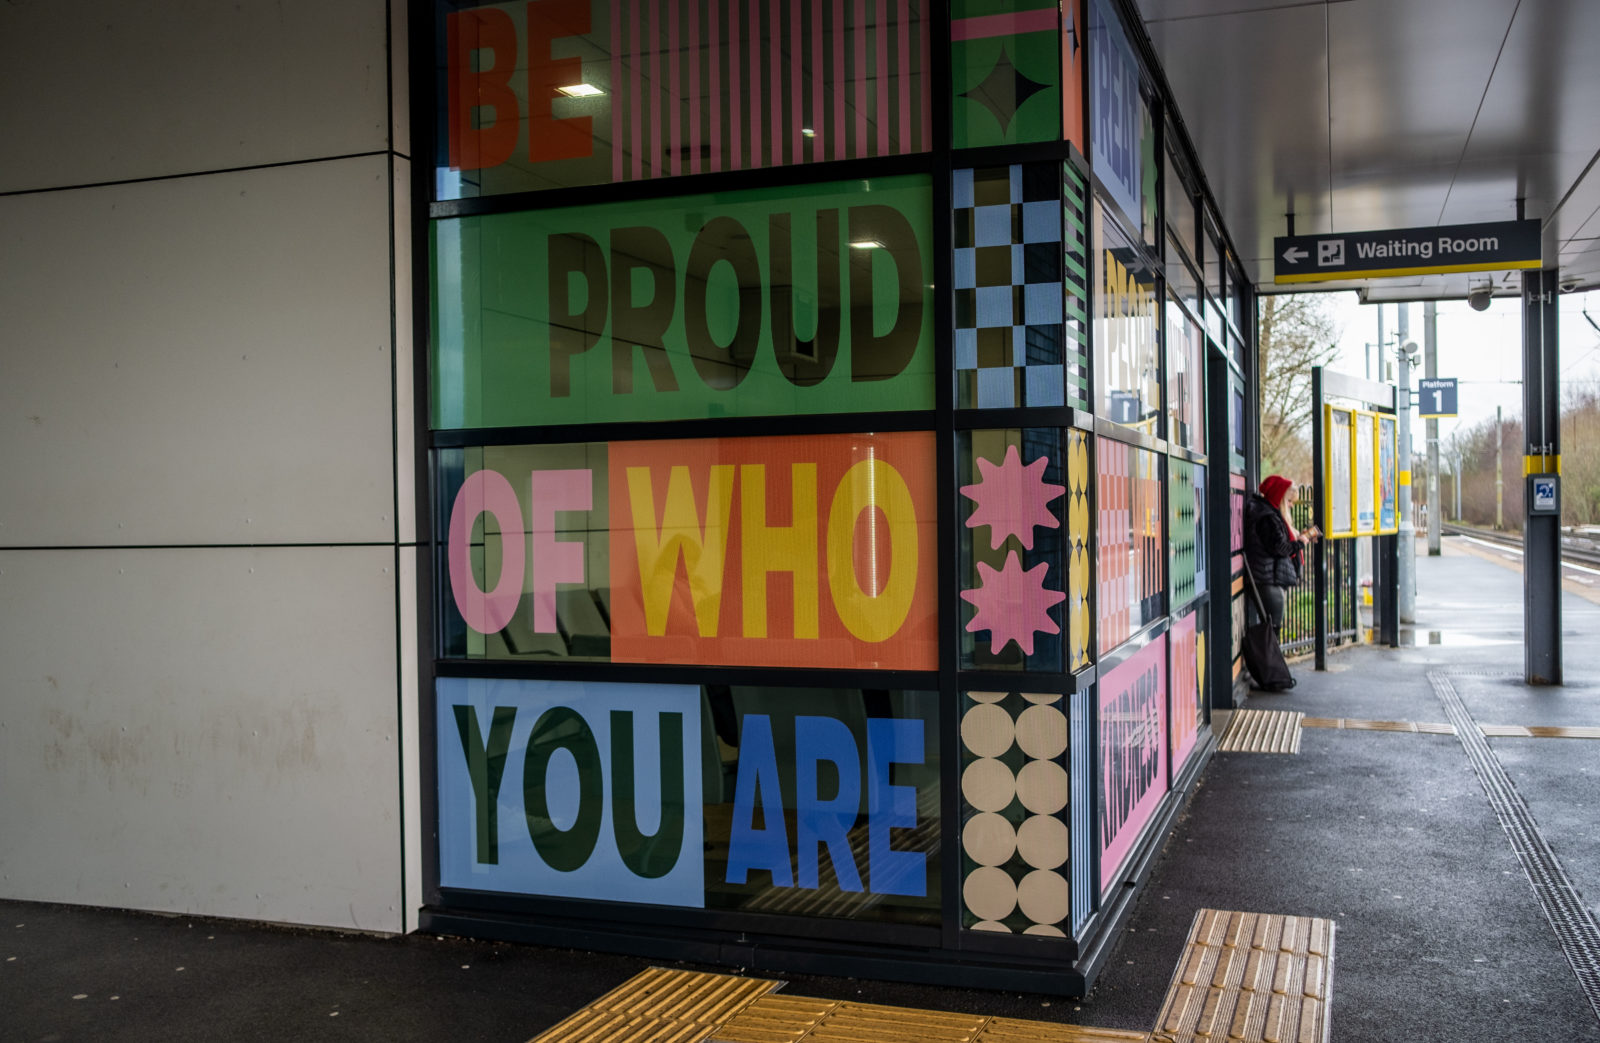 Close up of one side of the window reading ‘Be proud of who you are’.